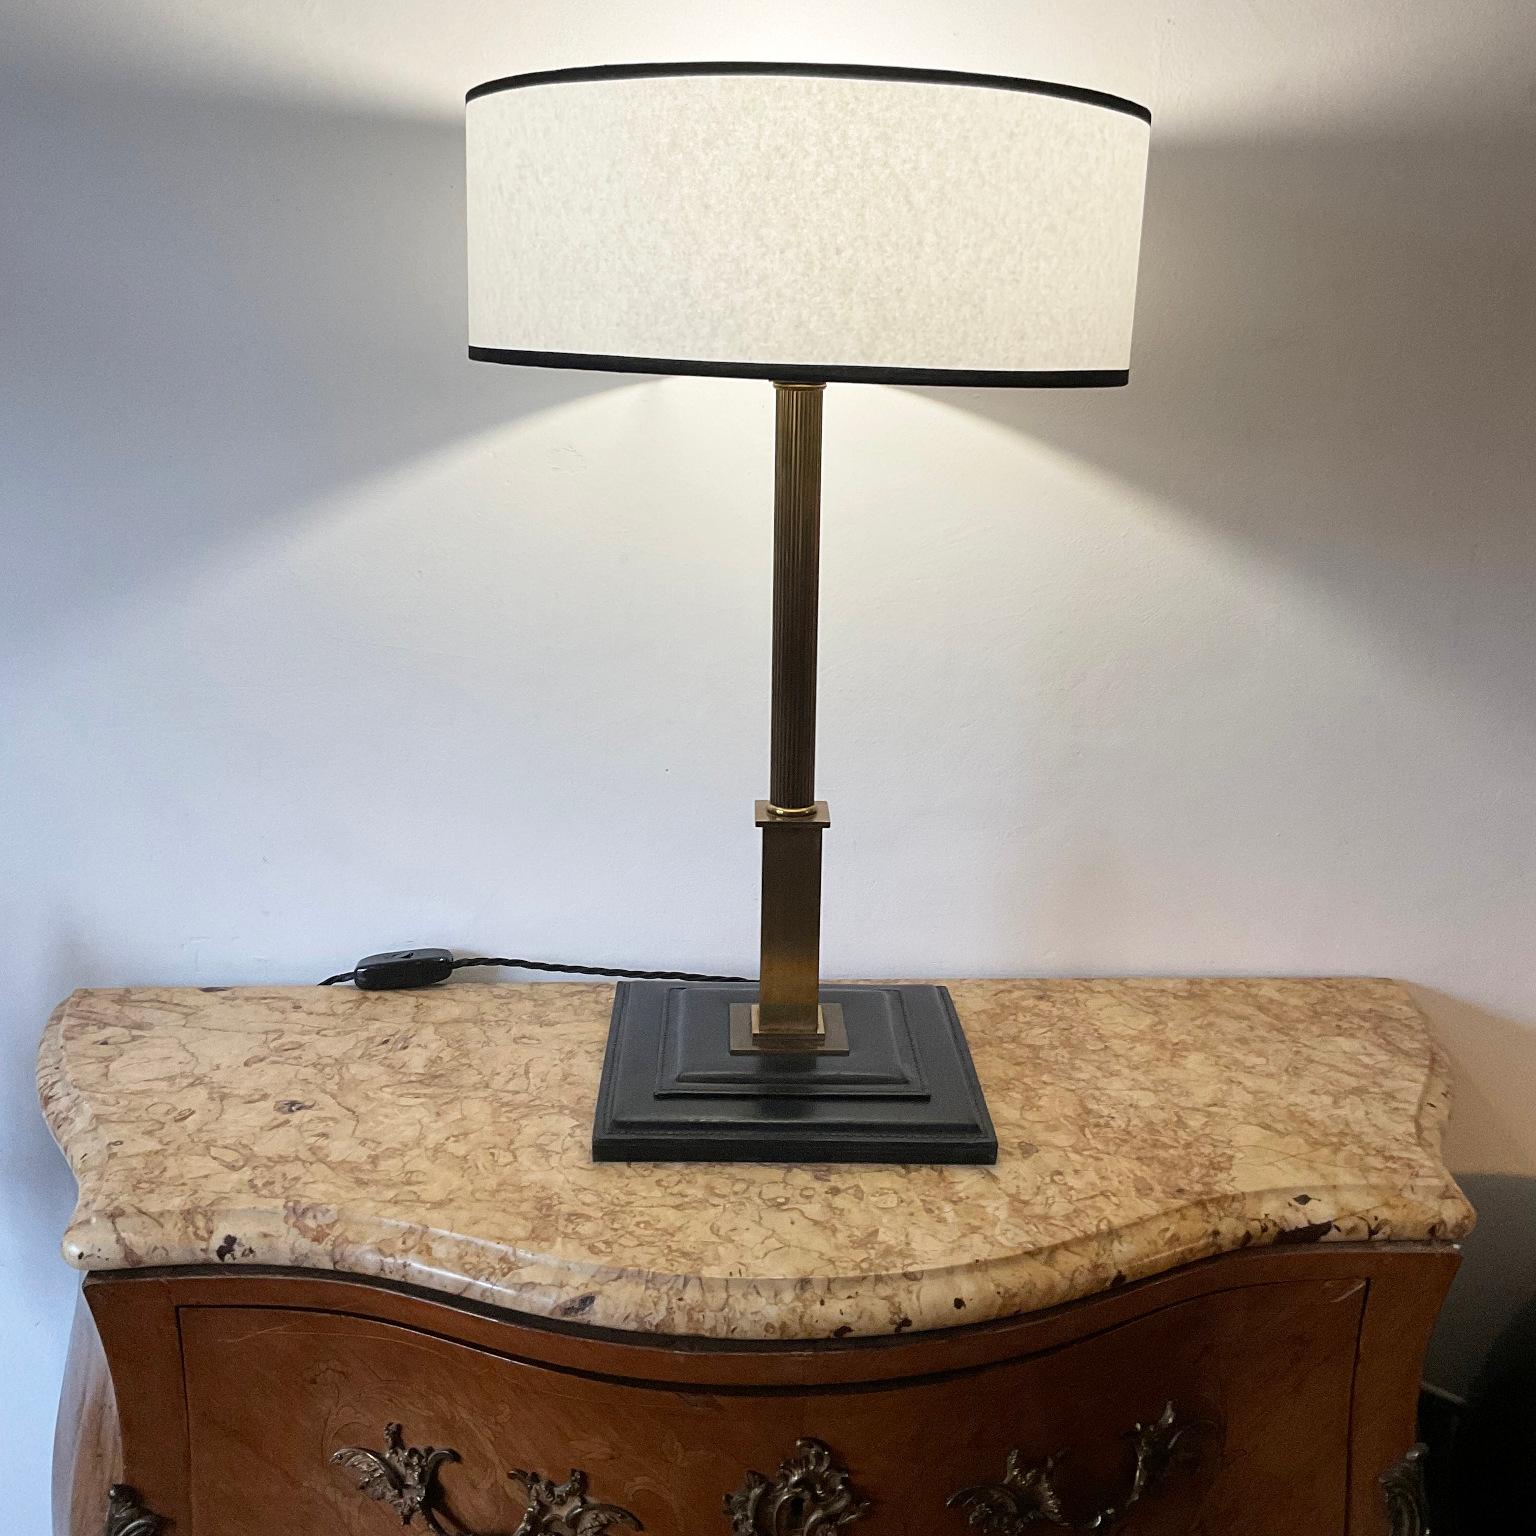 1950s Neoclassical table lamp in the Maison Longchamp or Hermes style.
Brass body with black full-grain saddle stitch leather base.
included a parchment lampshade with black fabric binding.
Rewired with insulated fabric cable and manual switch
Shade